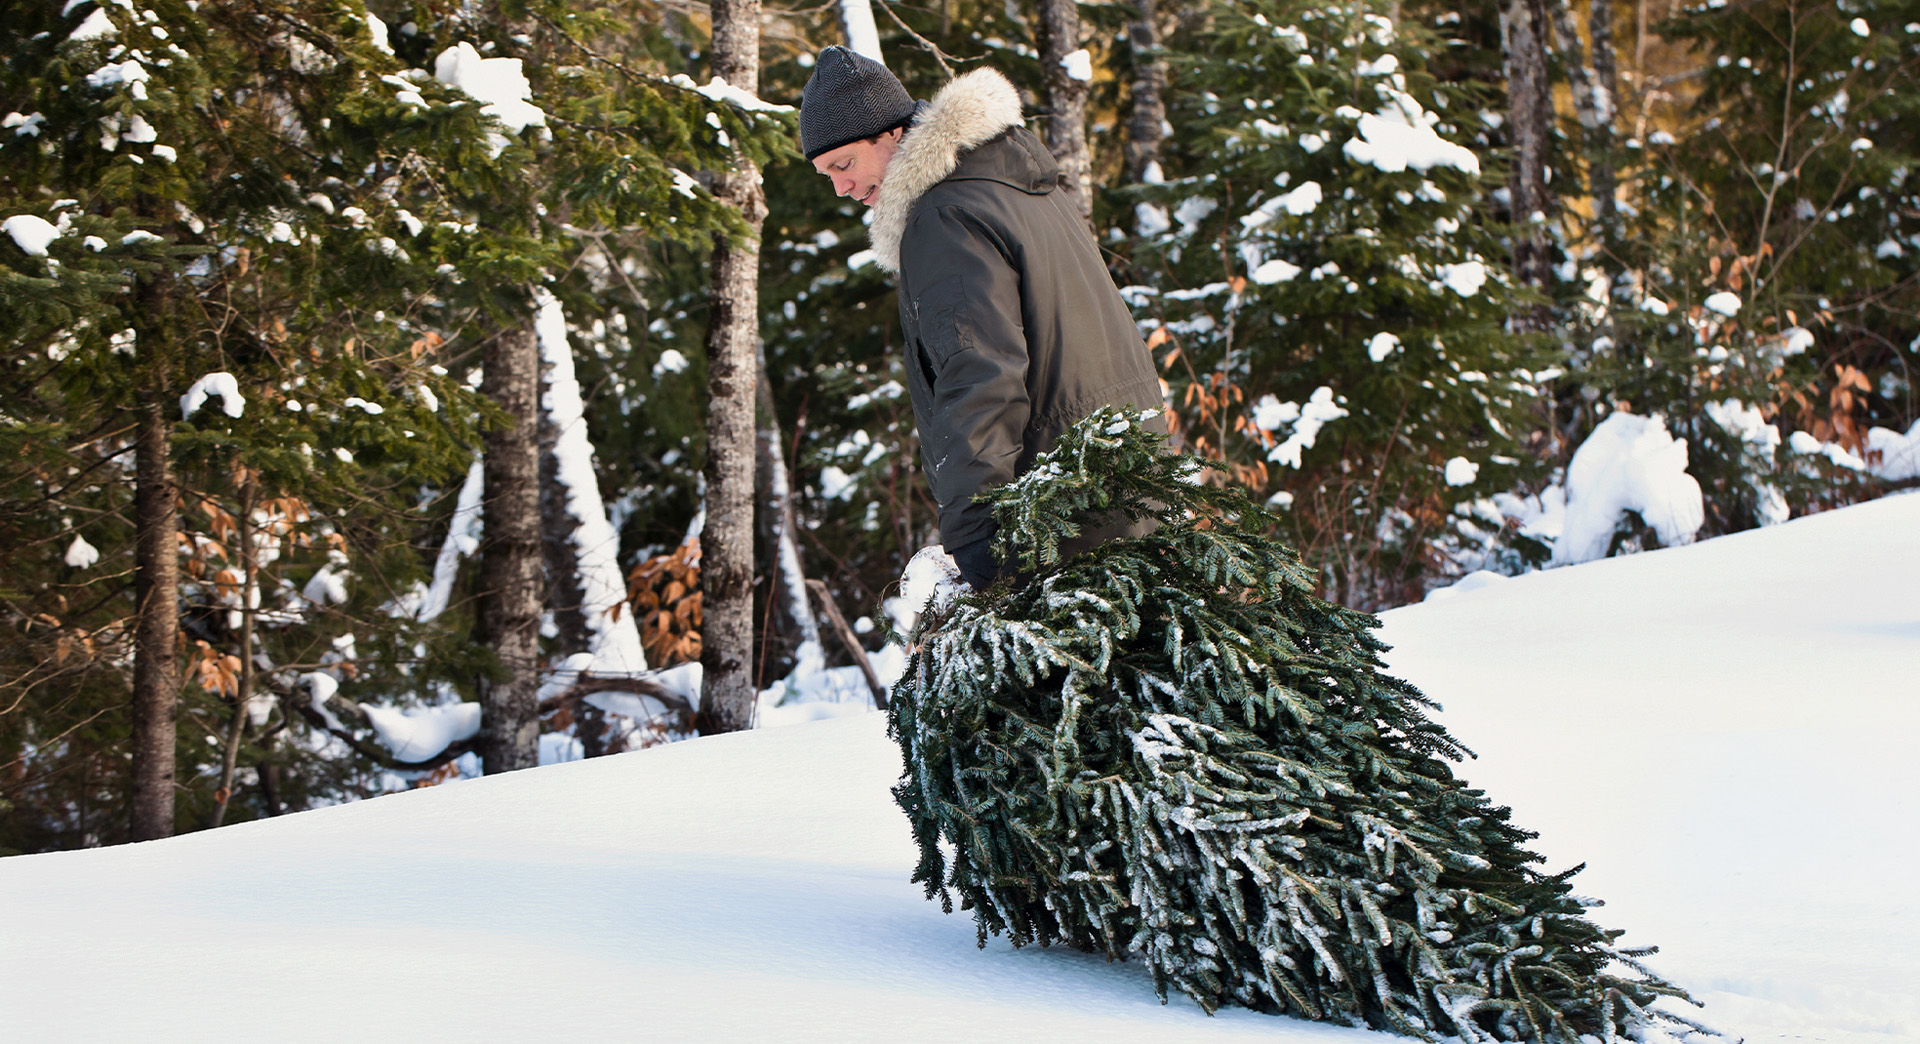 Man wearing a hat and winter coat pulls a Christmas tree along snow-covered ground, with a view of forest behind him